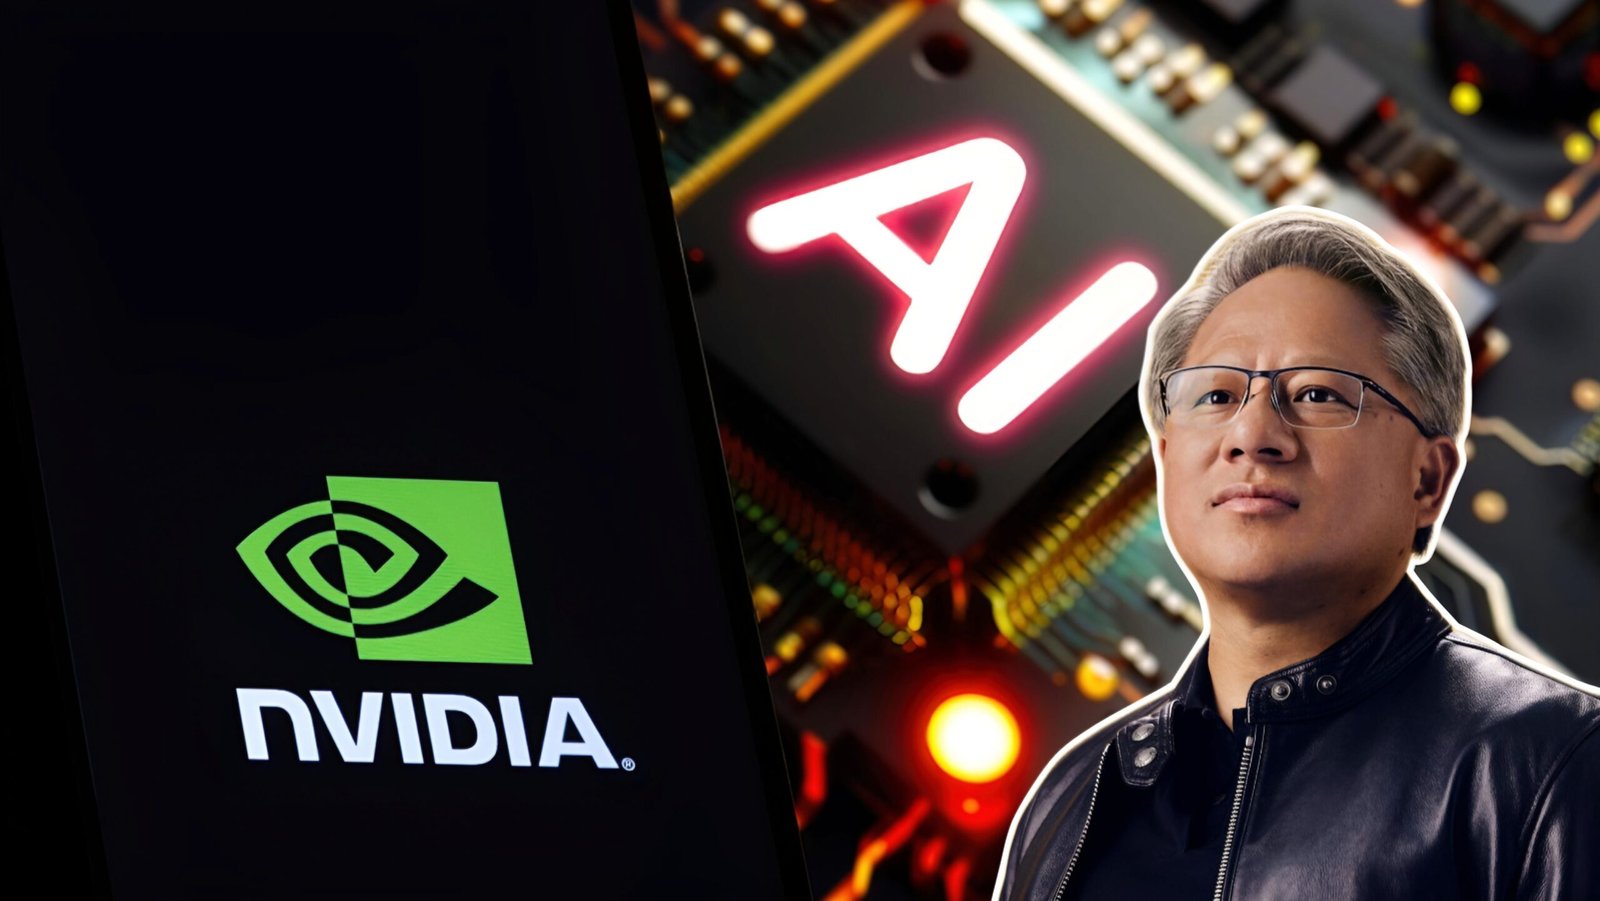 Nvidia Business Model: How will Nvidia dominate the AI industry?